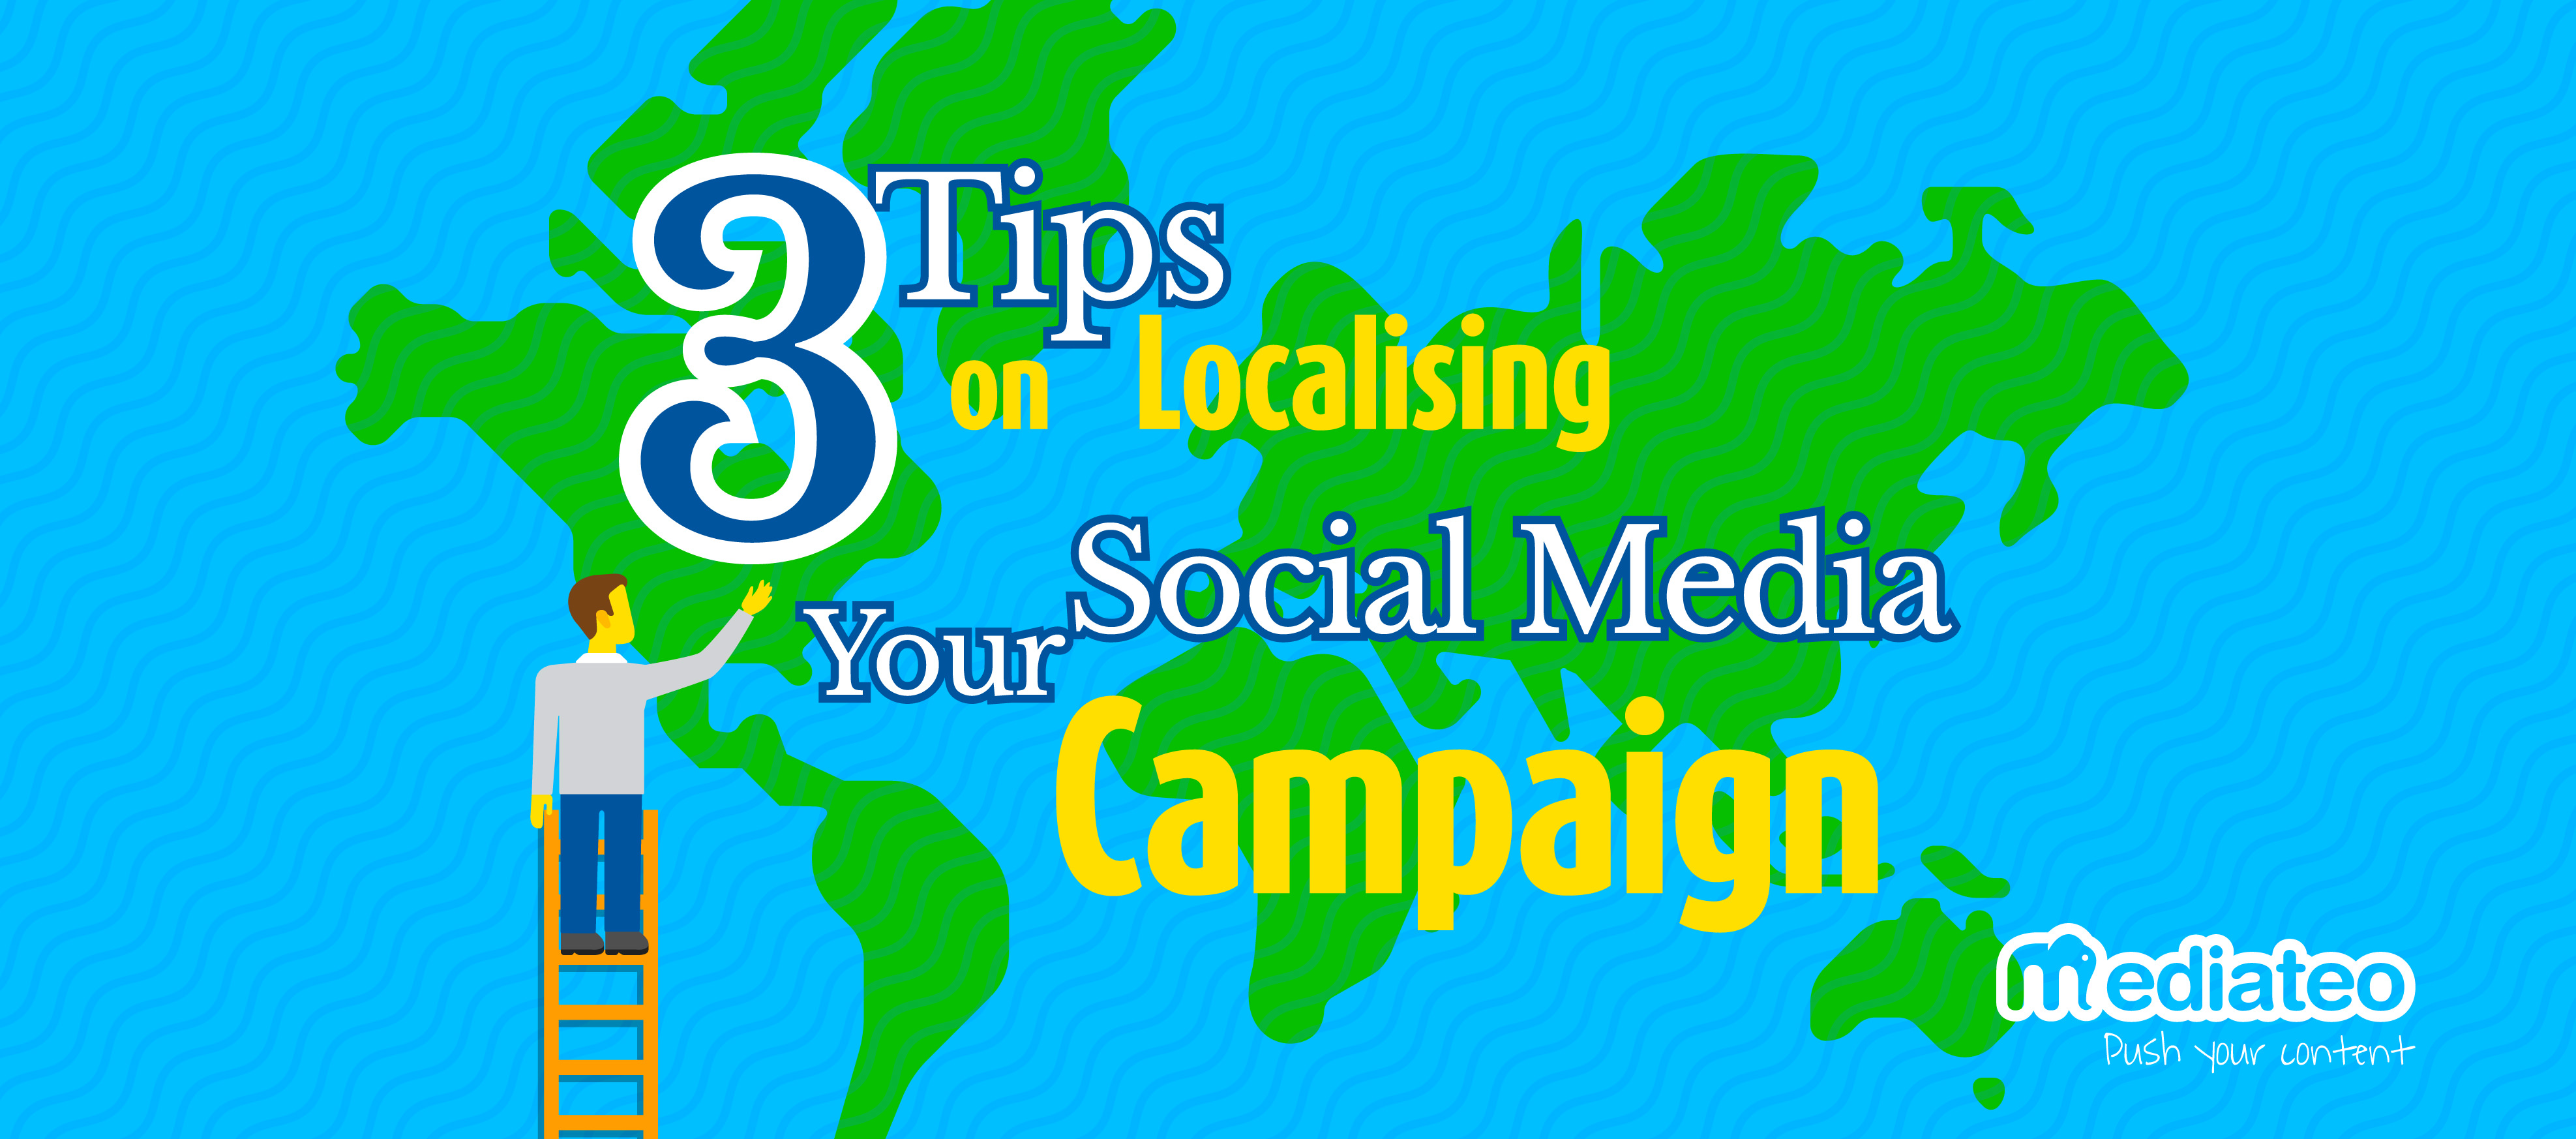 3 Tips on Localising Your Social Media Campaign